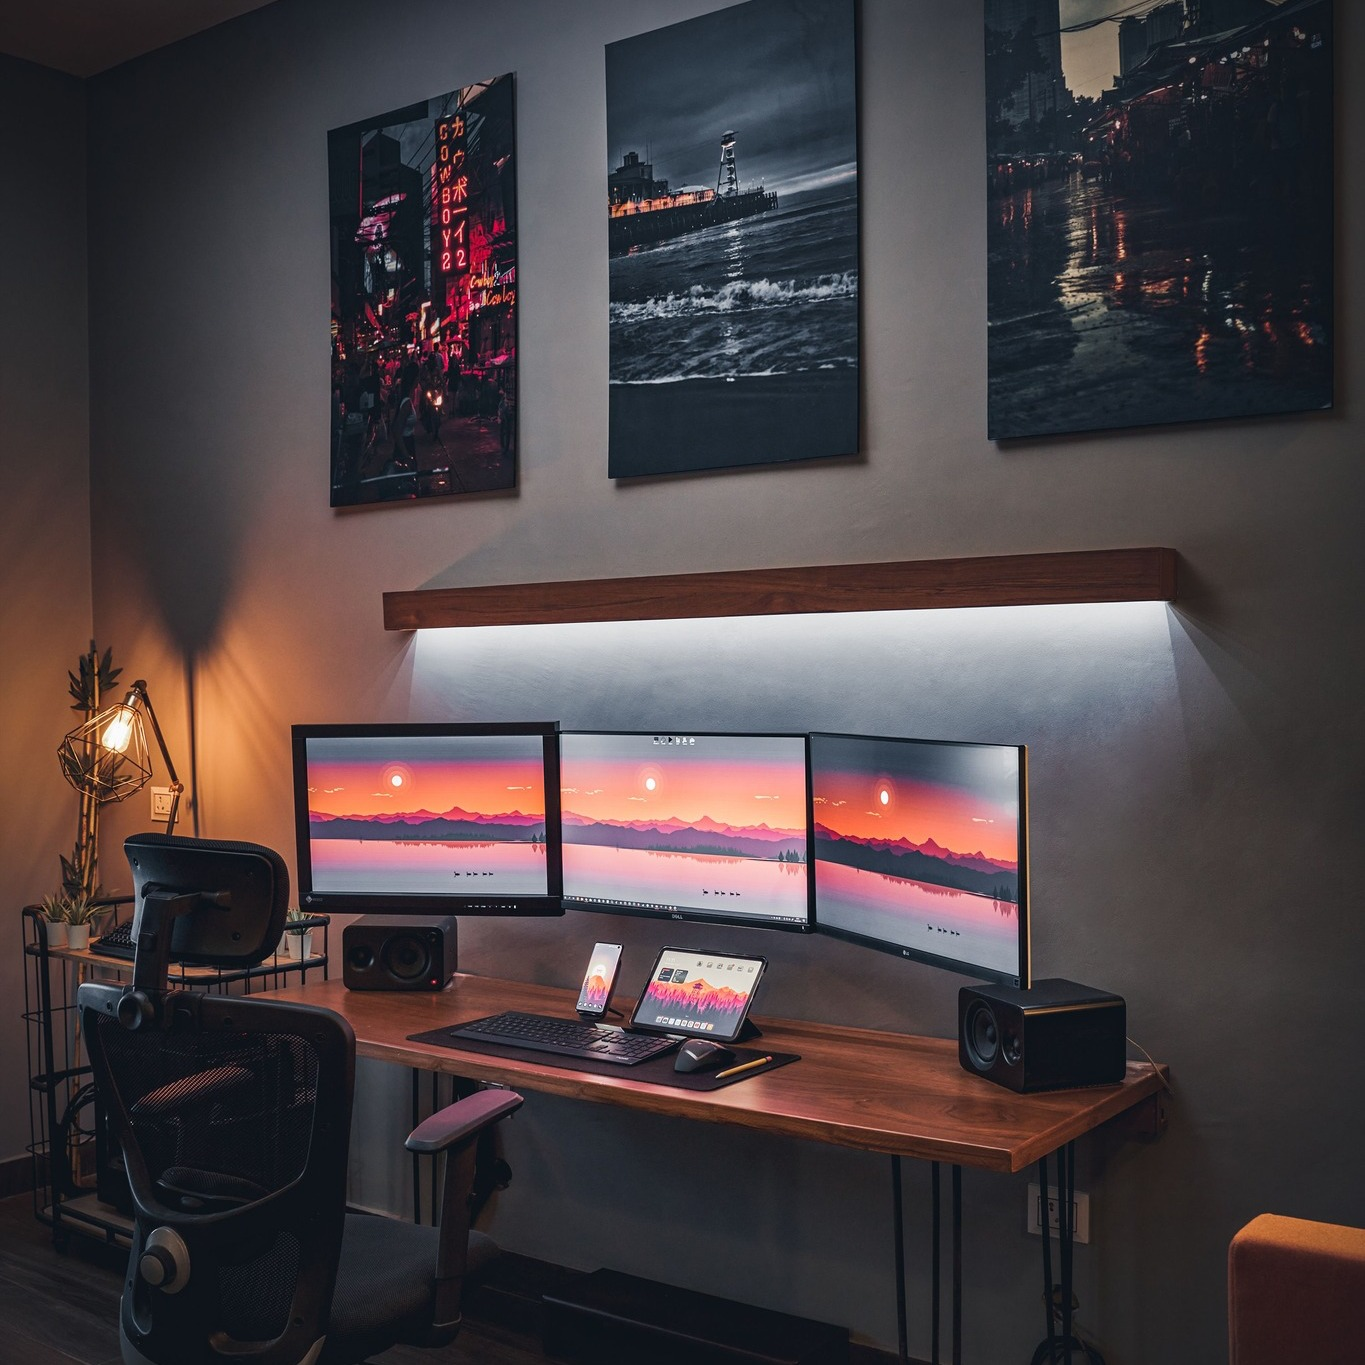 gaming desk setup or ergonomic setup ambiance of a gaming space, wall mounted light bar ideas